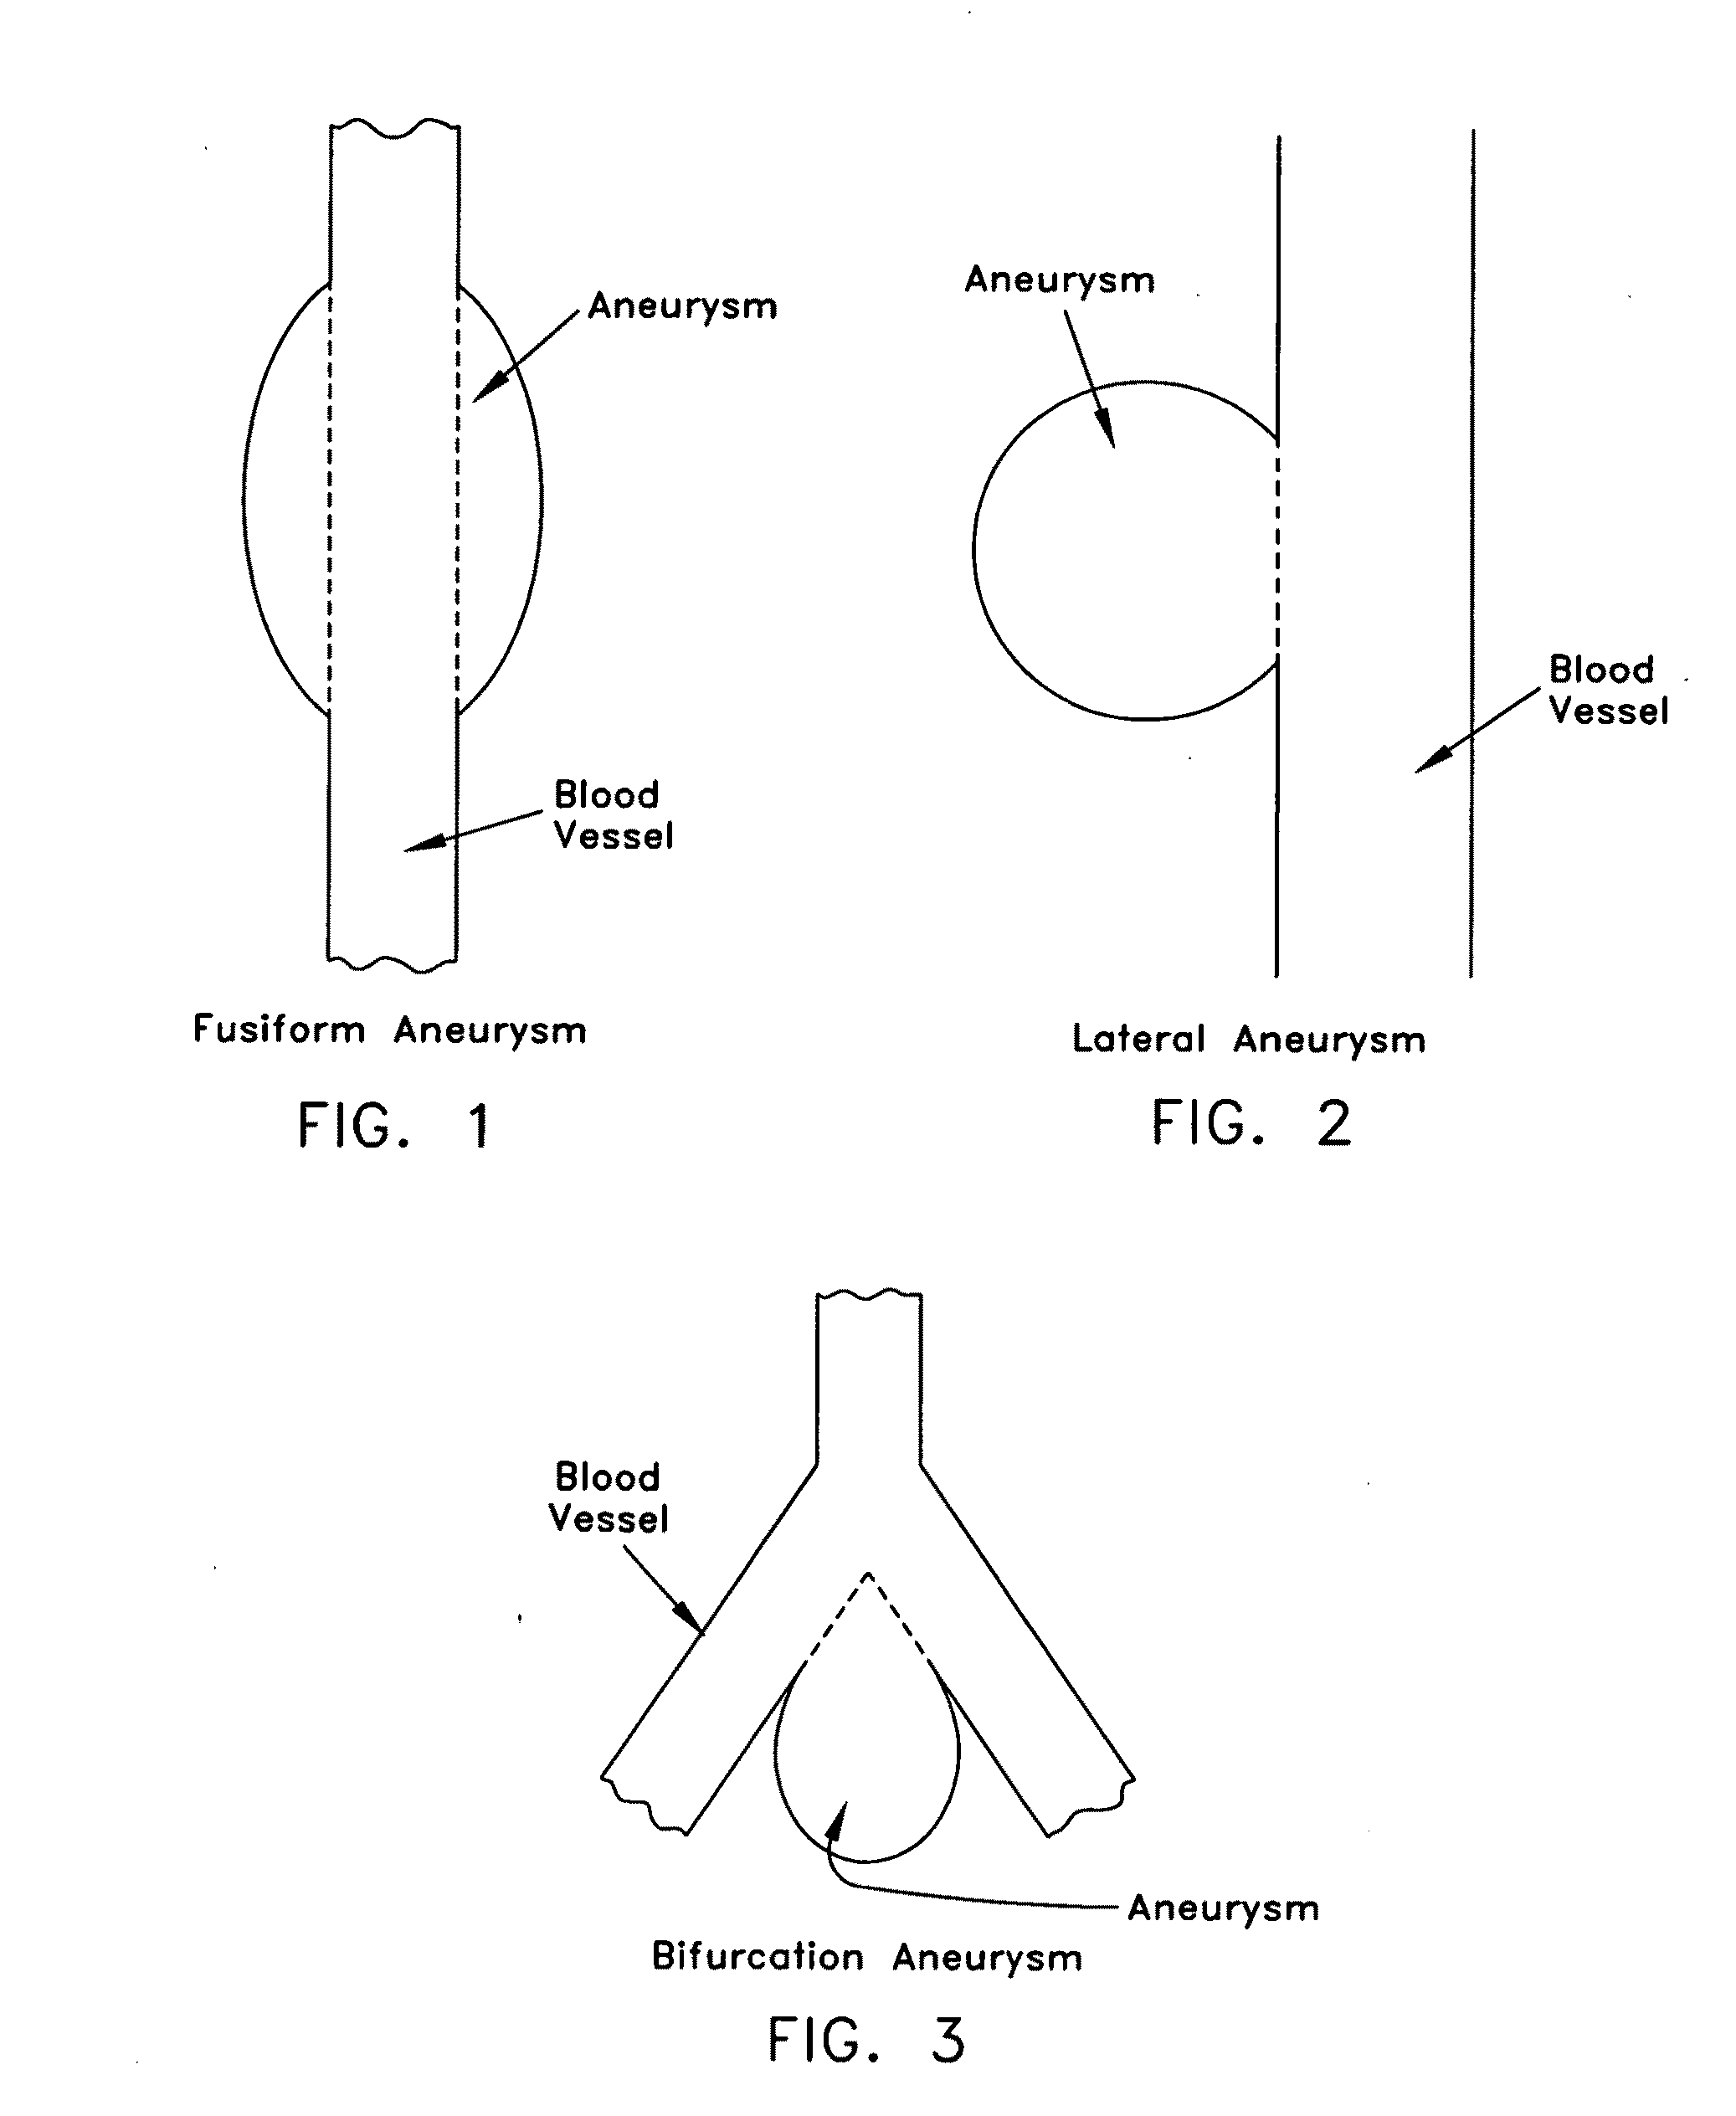 Method and apparatus for restricting flow through an opening in the side wall of a body lumen, and/or for reinforcing a weakness in the side wall of a body lumen, while still maintaining substantially normal flow through the body lumen